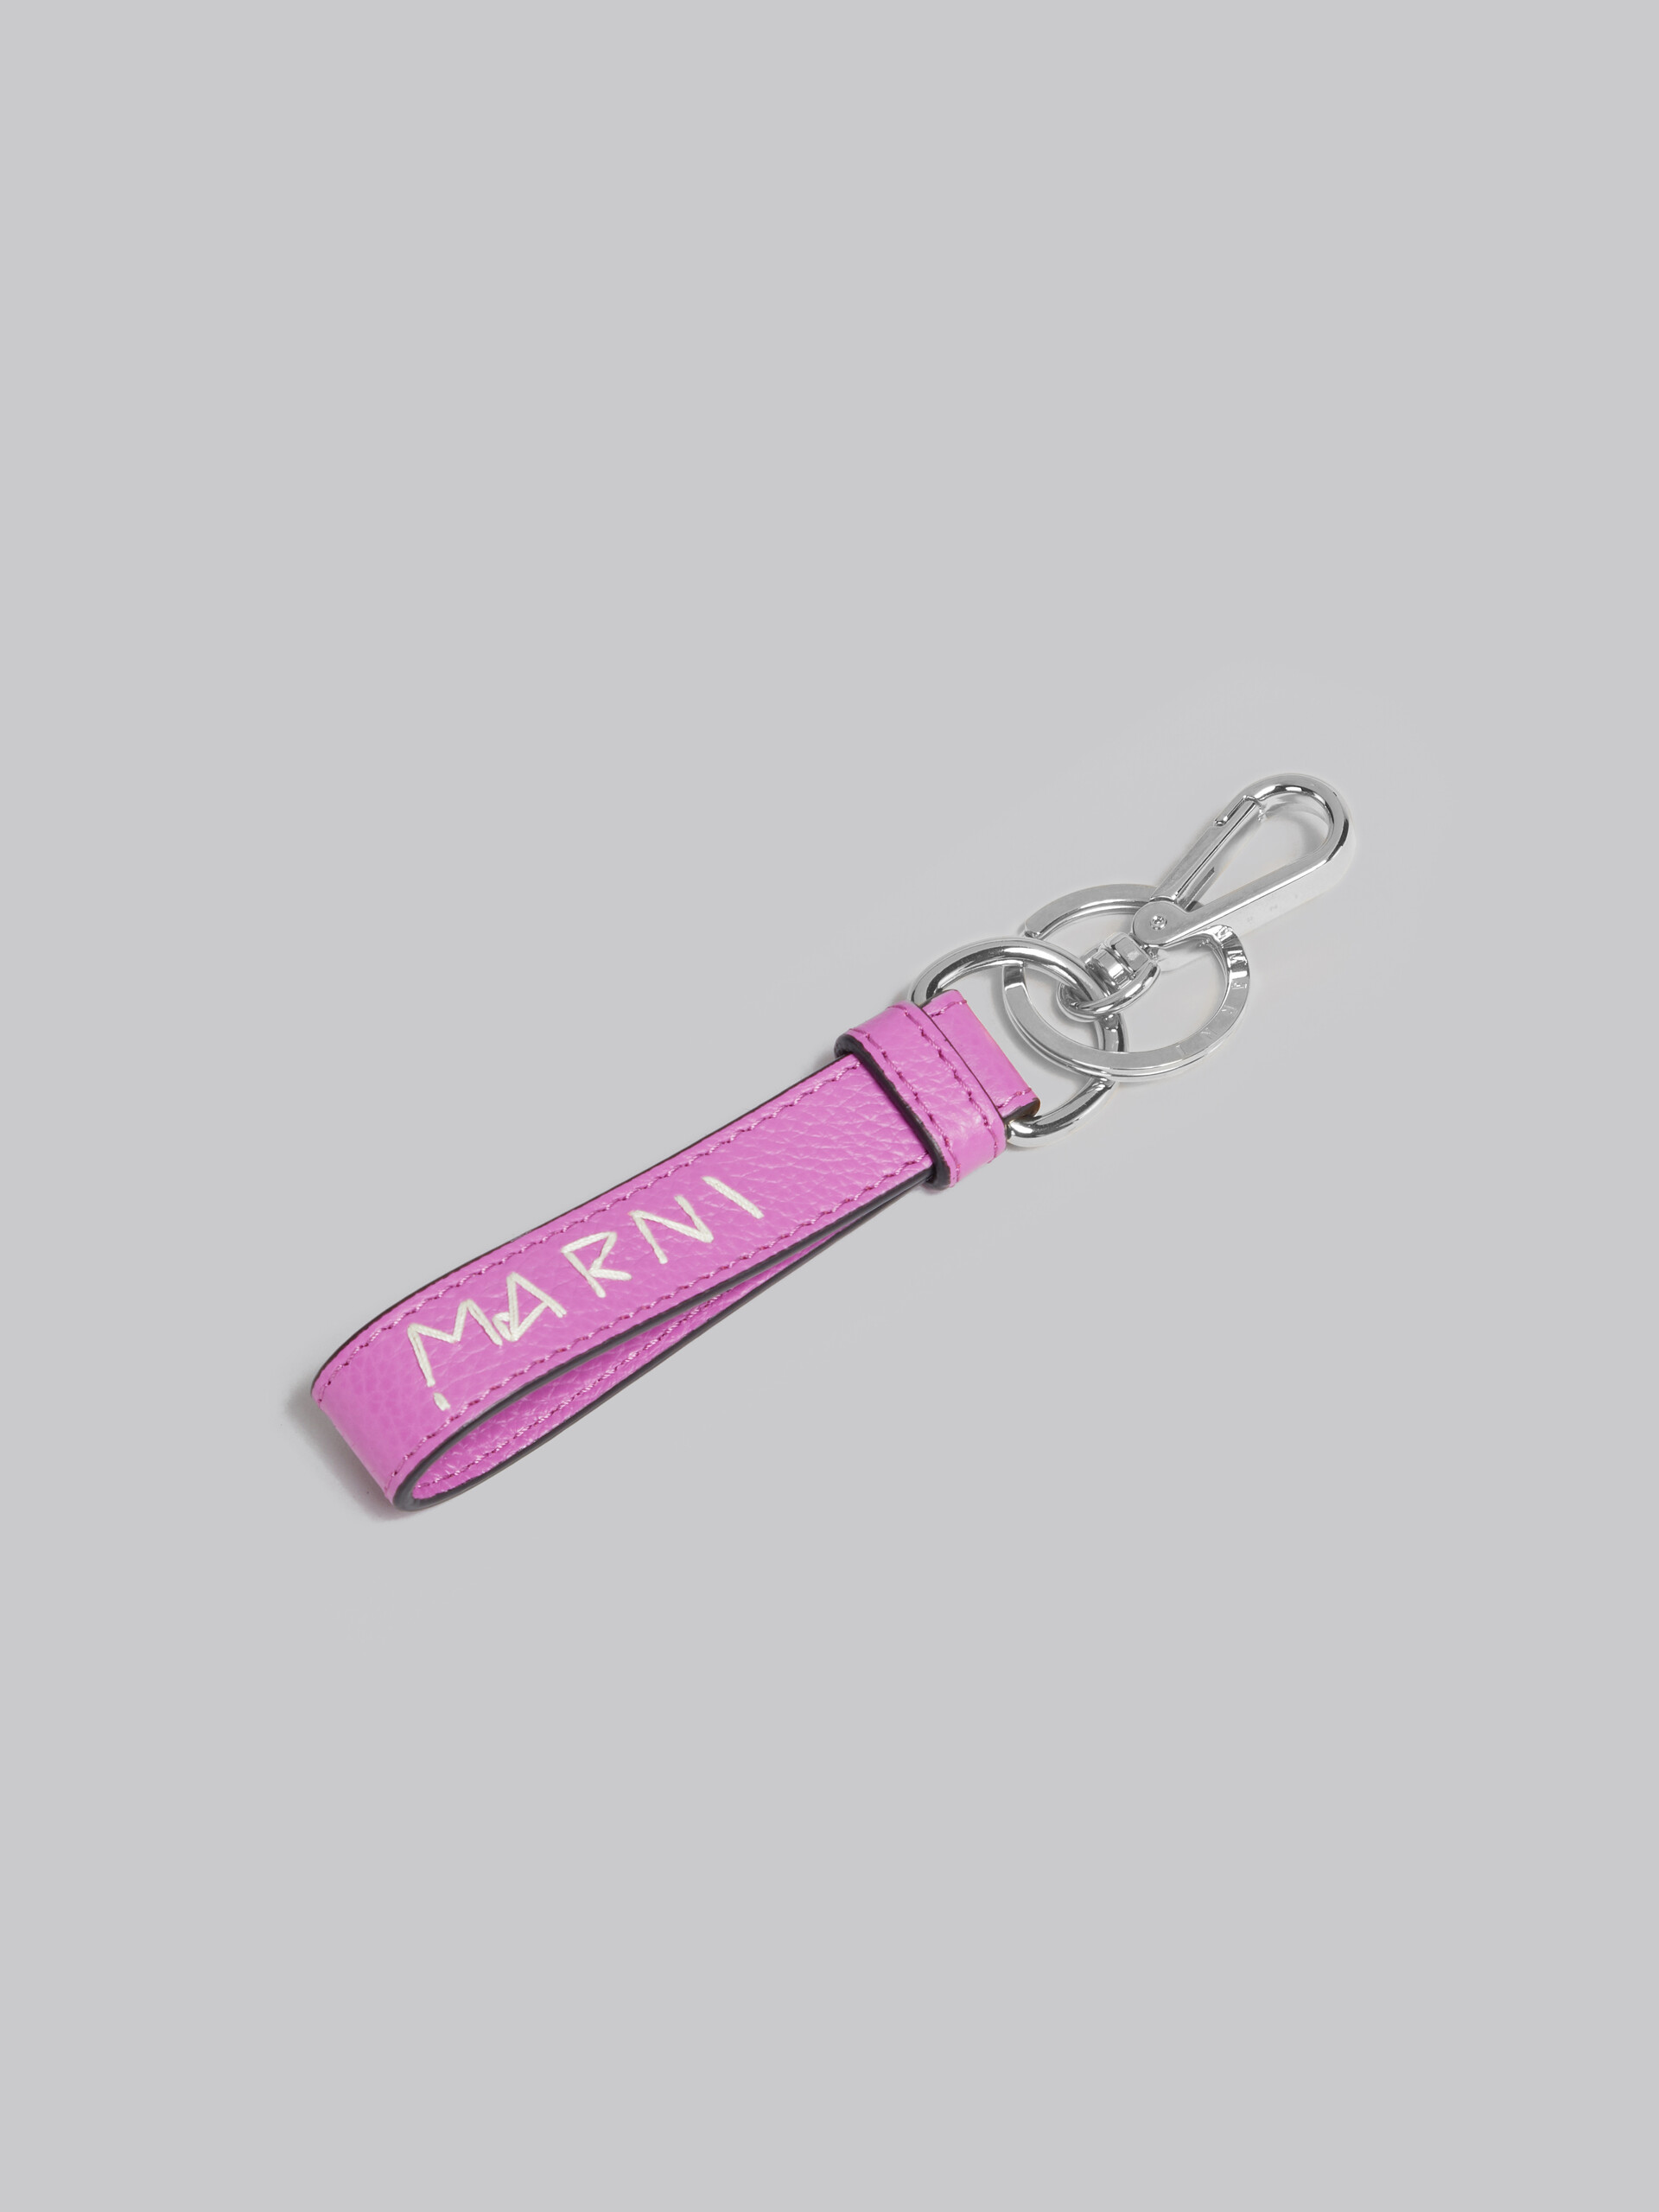 Pink leather keyring with Marni mending - Key Rings - Image 2